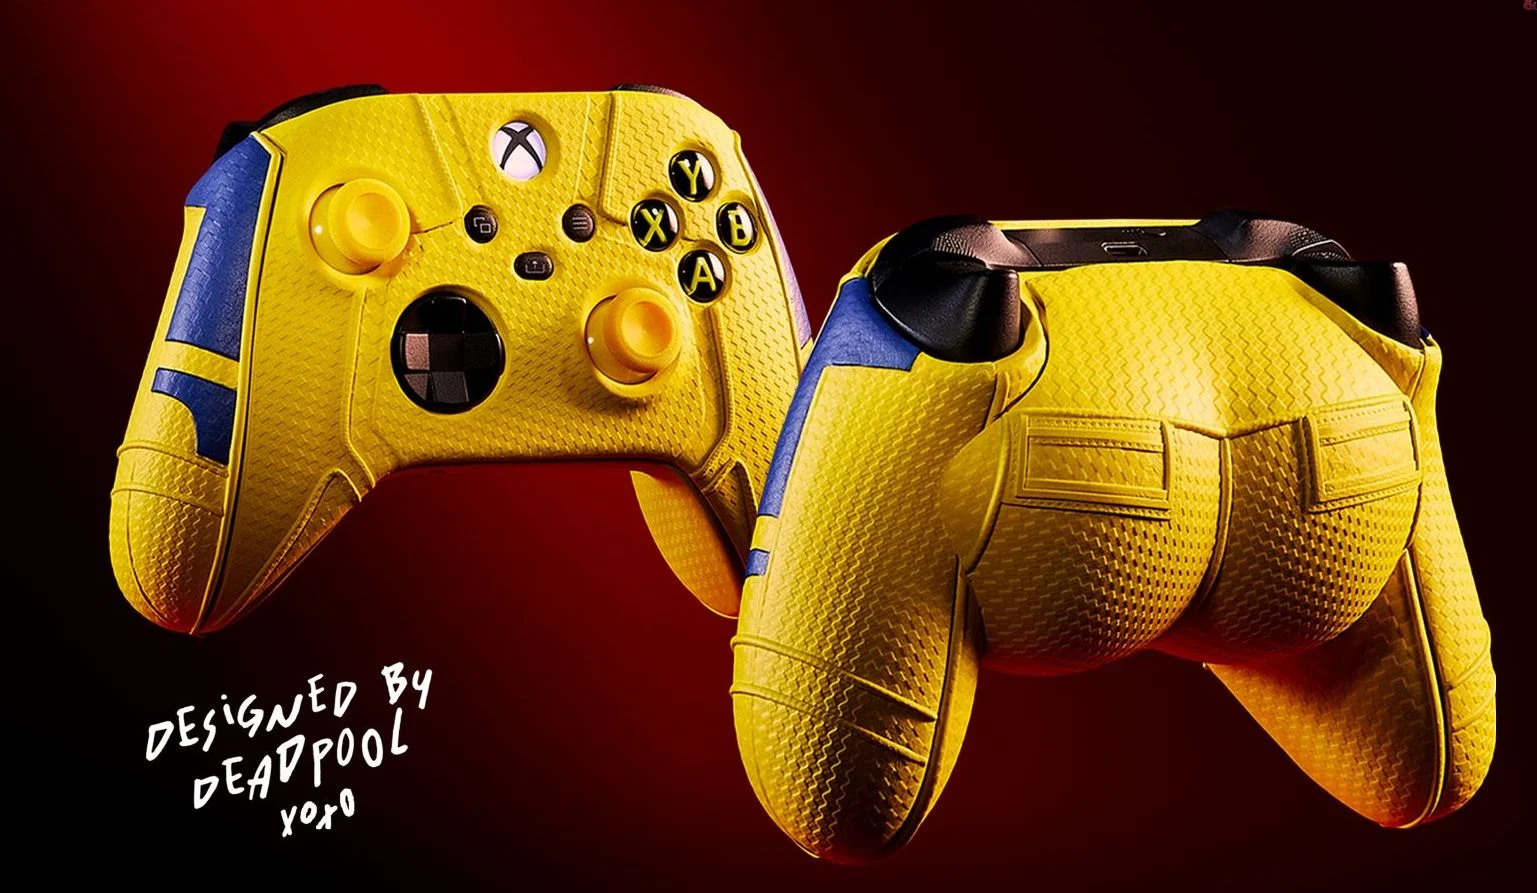 A second gamepad based on the upcoming comic book Deadpool and Wolverine has been presented for Xbox.